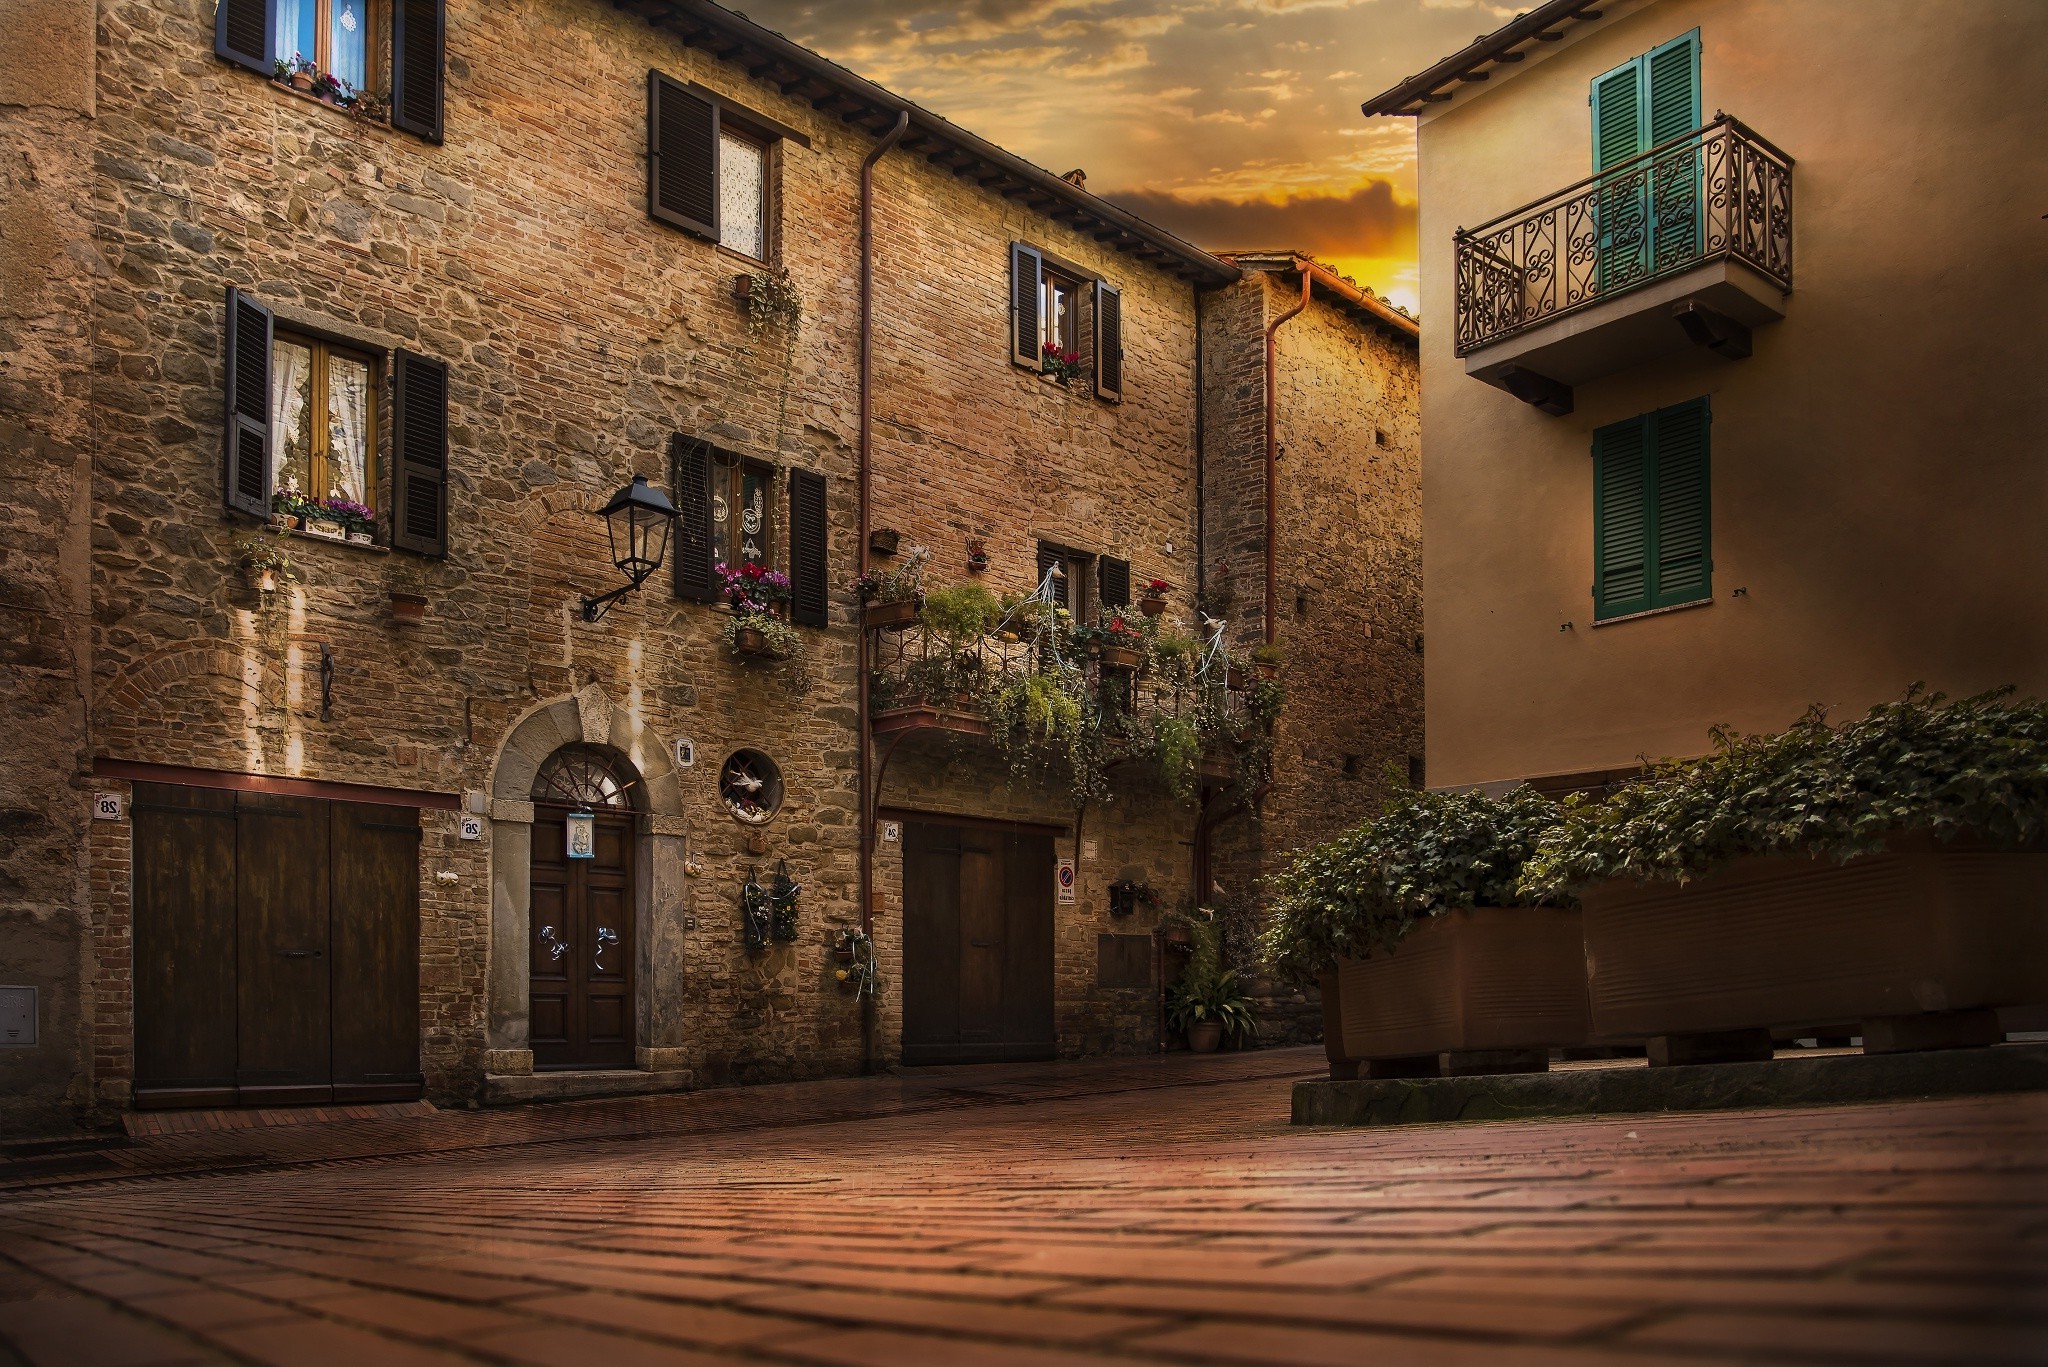 architecture, Town, House, Building, Italy, Street, Balconies, Window, Clouds, Sunset Wallpaper